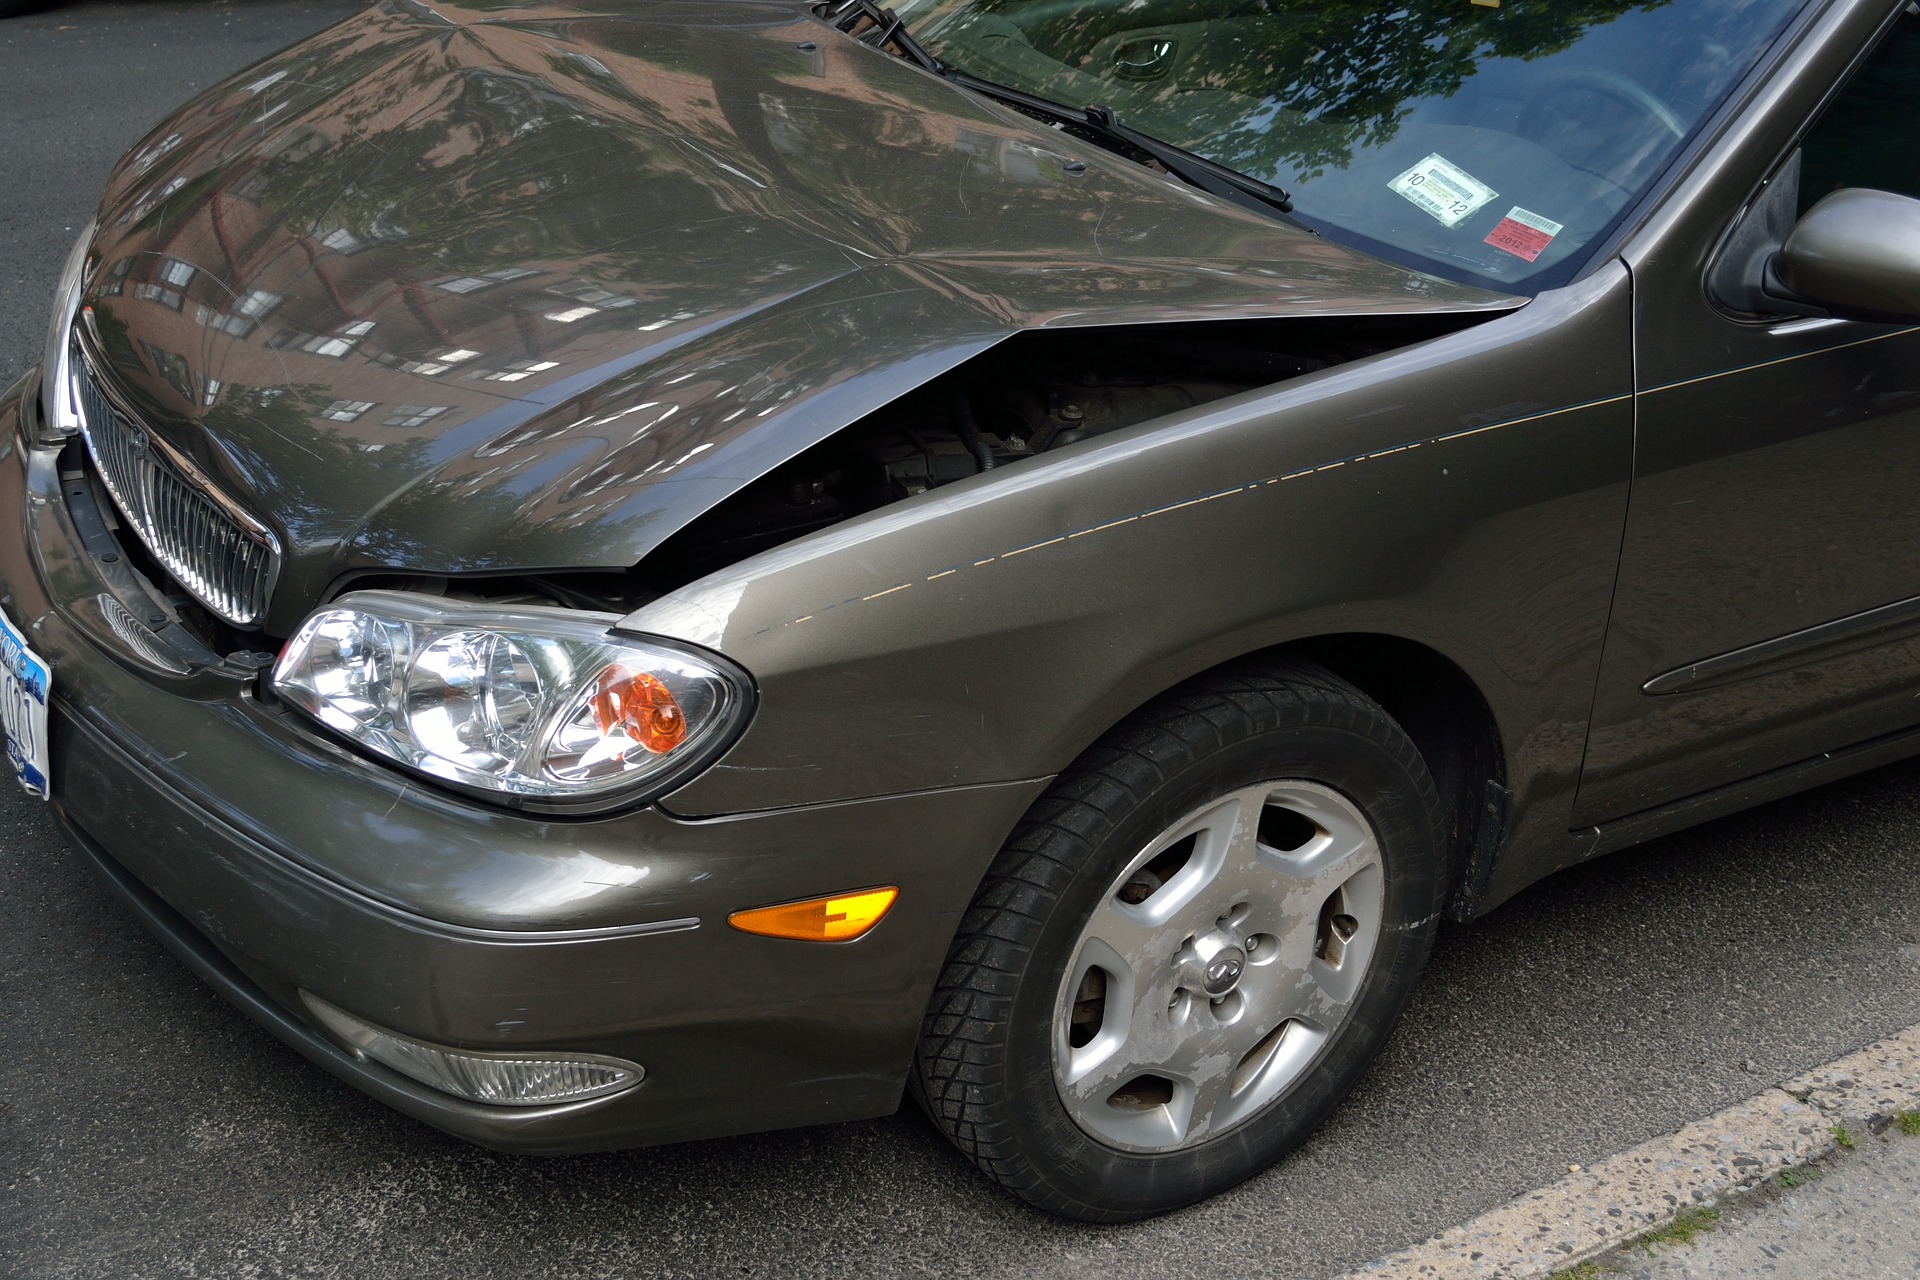 Minor Car Accidents: What Should You Do and Can You Sue?